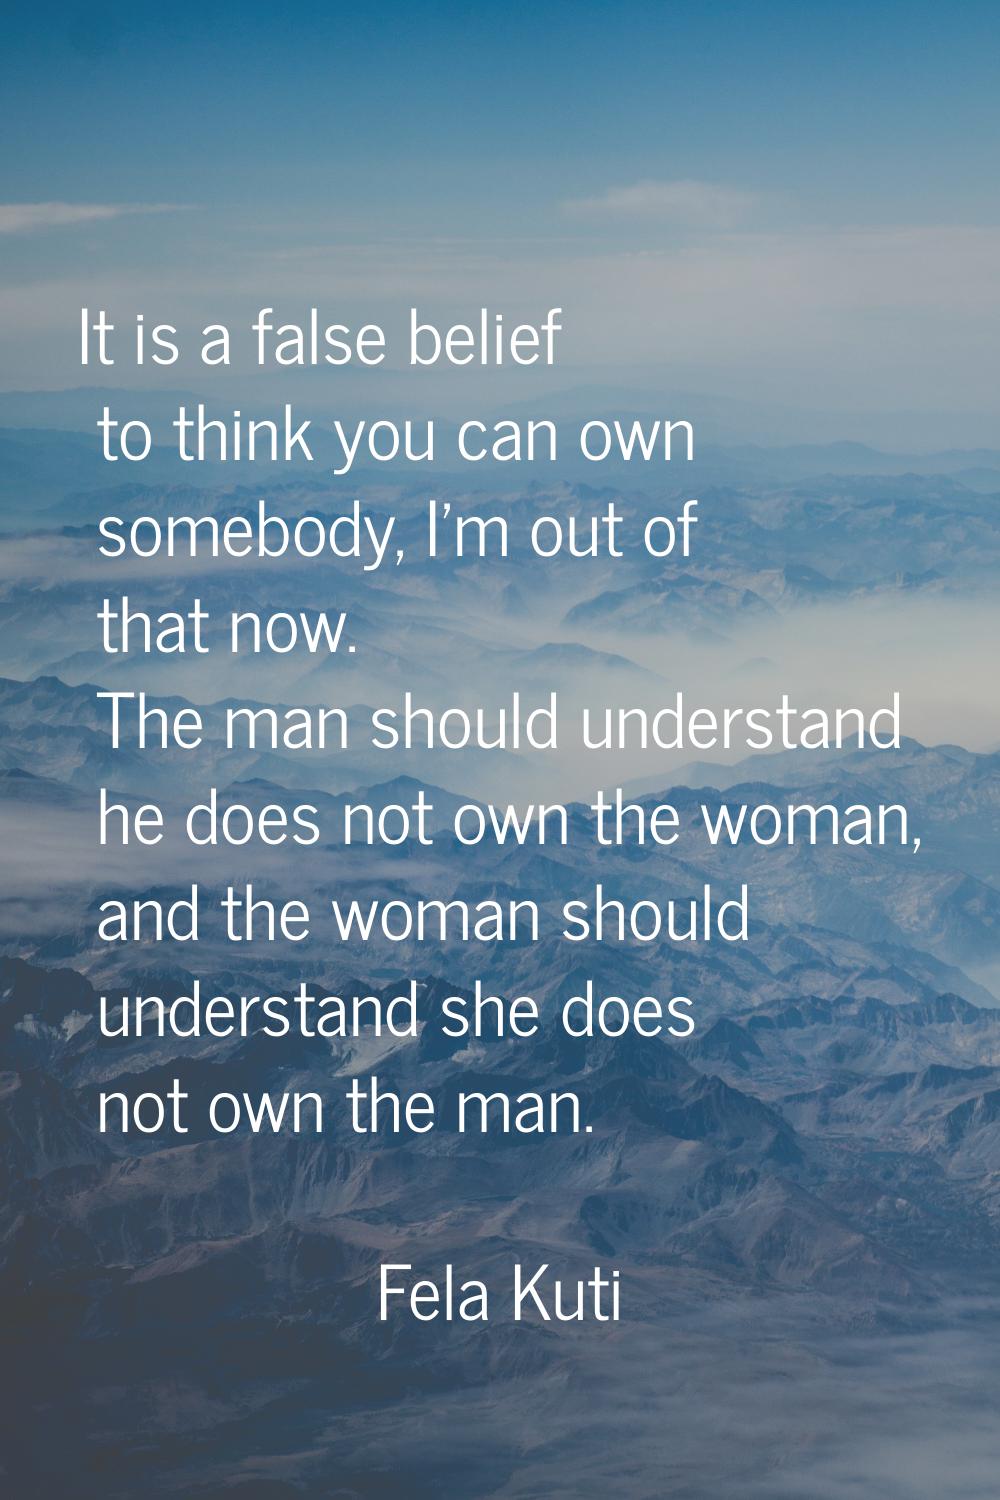 It is a false belief to think you can own somebody, I'm out of that now. The man should understand 